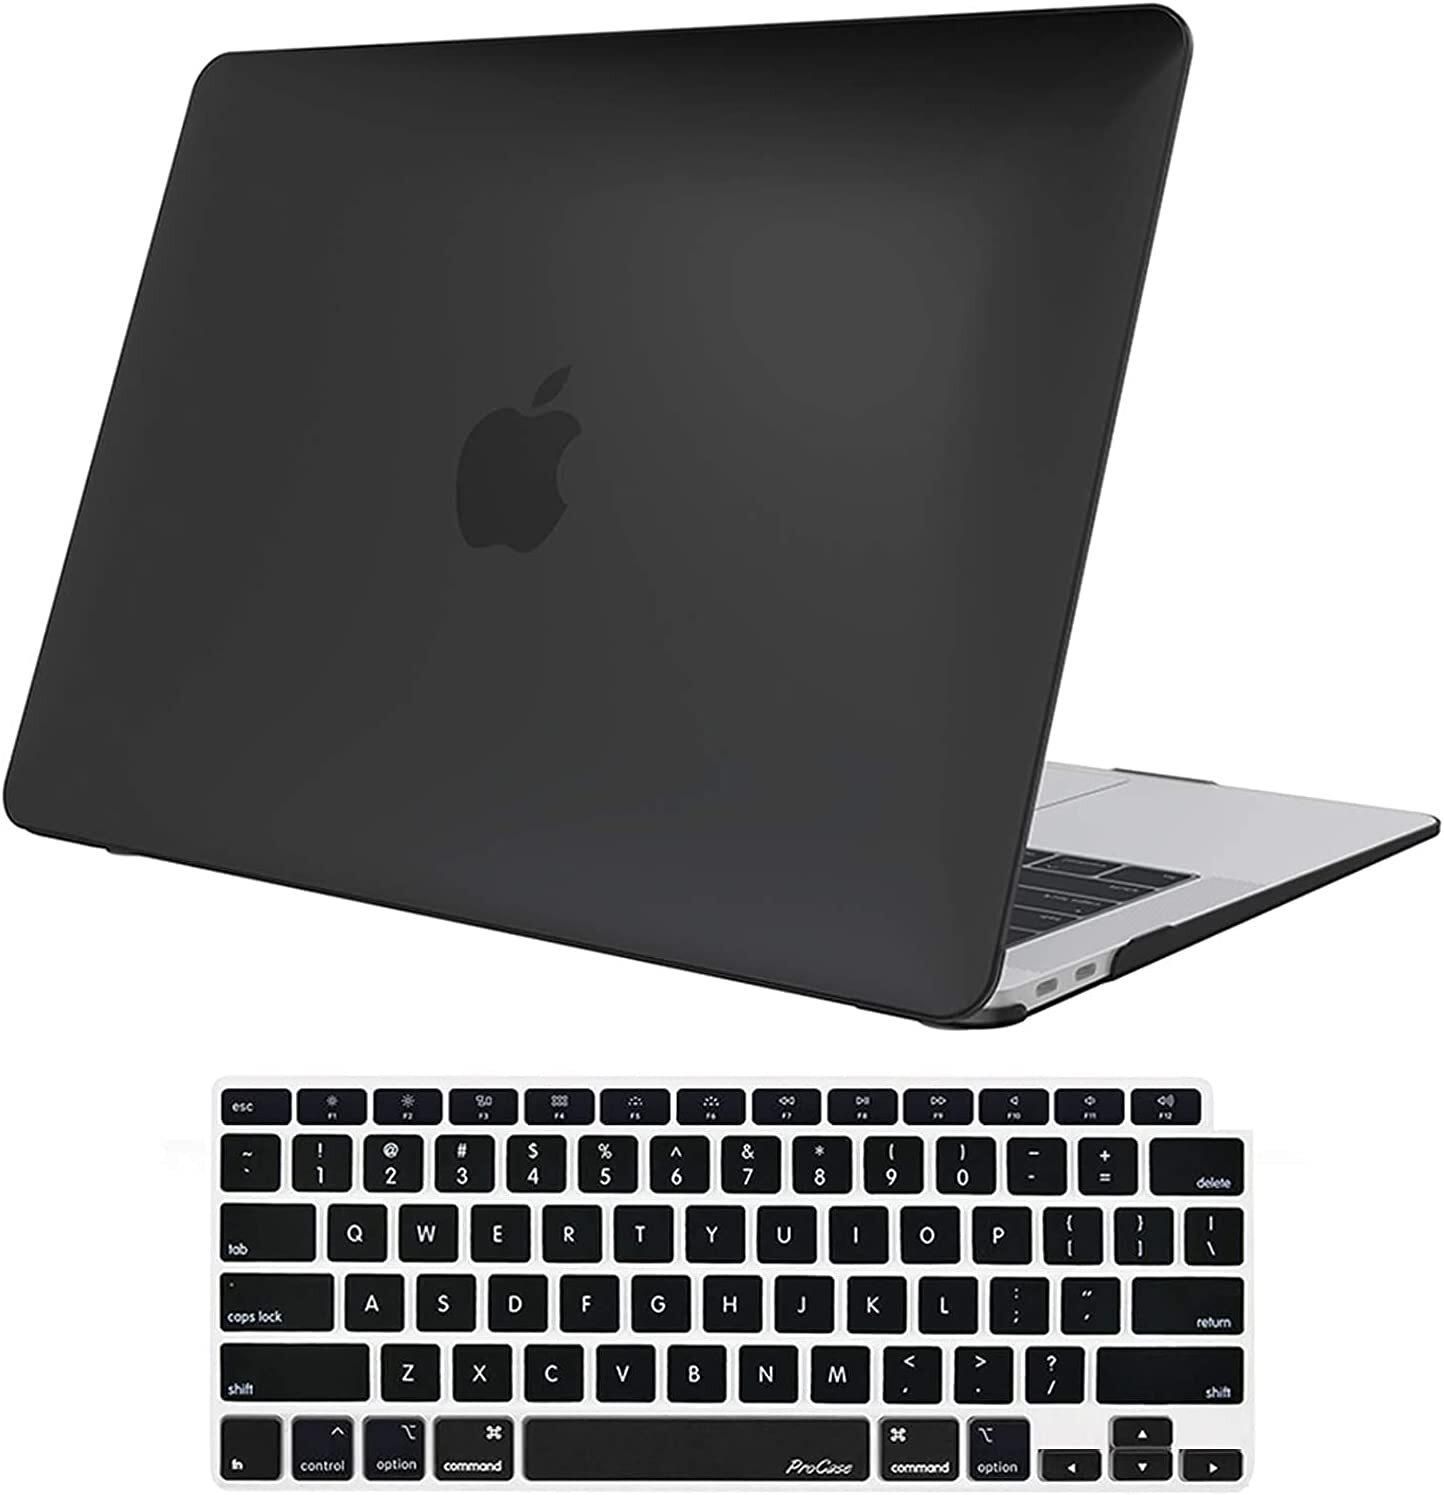 Ntech Macbook Air 13 Inch Case 2020 2019 2018 Release A2337 M1 A2179 A1932 Hard Case Shell Cover For Macbook Air 13-Inch Model A2179 A1932 With Keyboard Skin Cover -Black